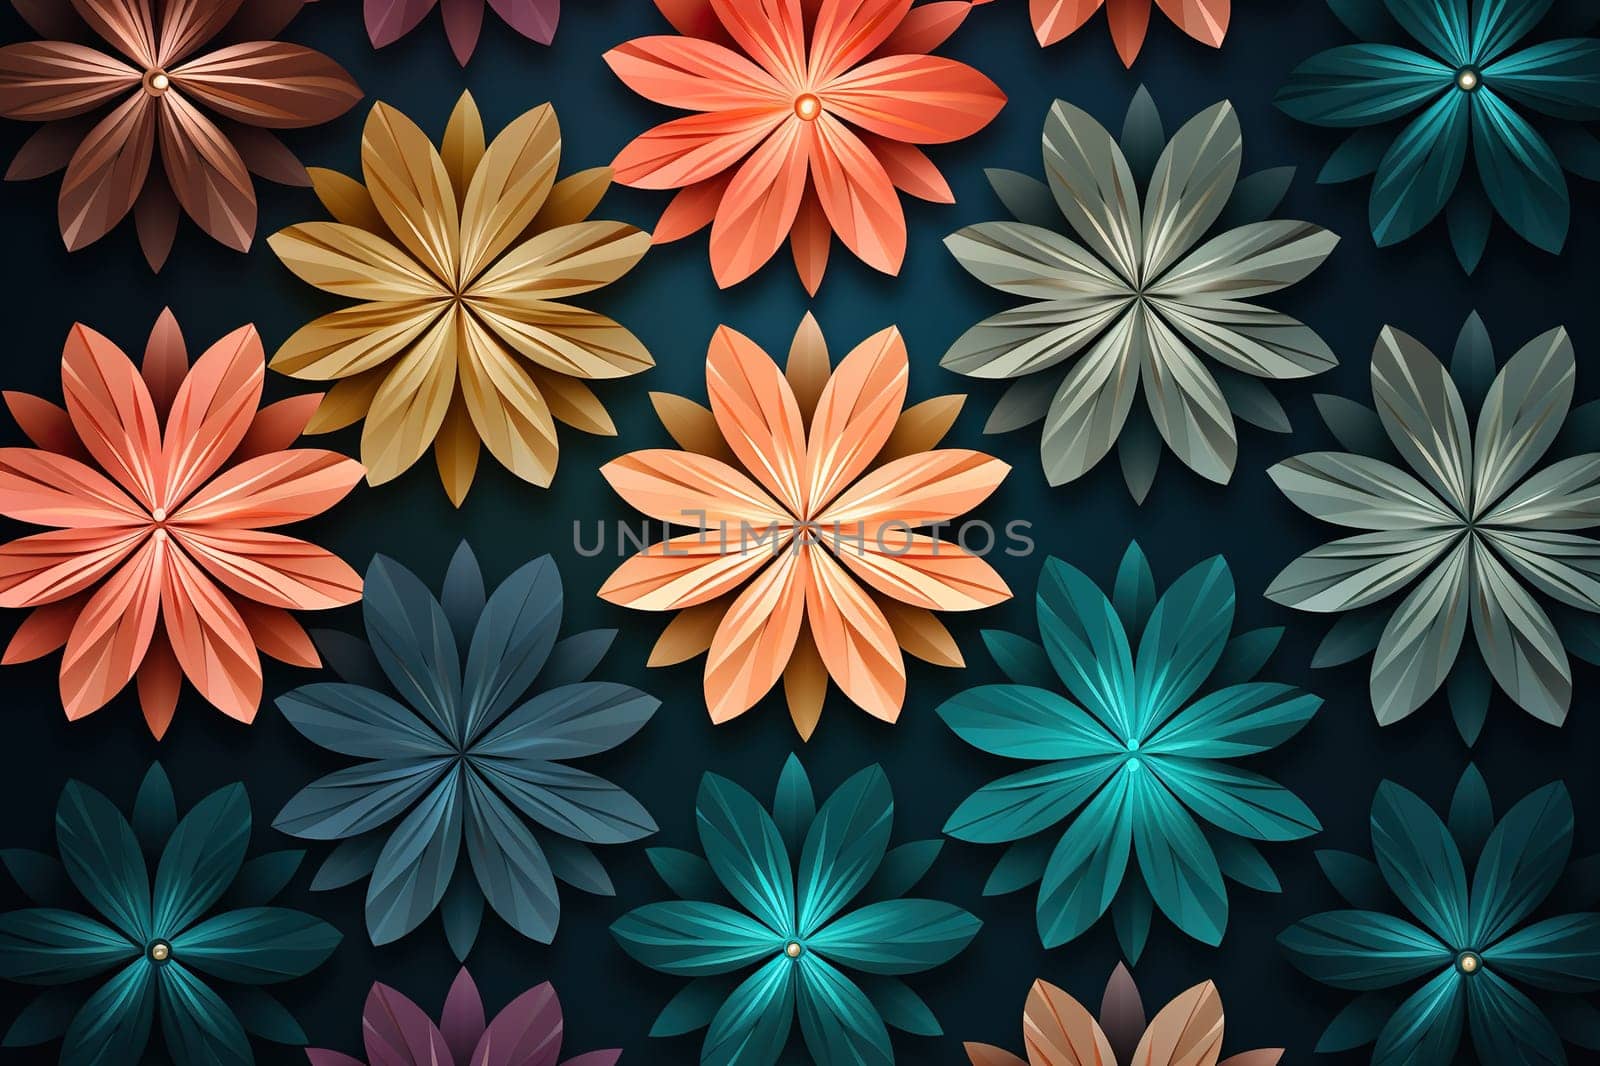 Dark background with repeating flowers. Generated by artificial intelligence by Vovmar